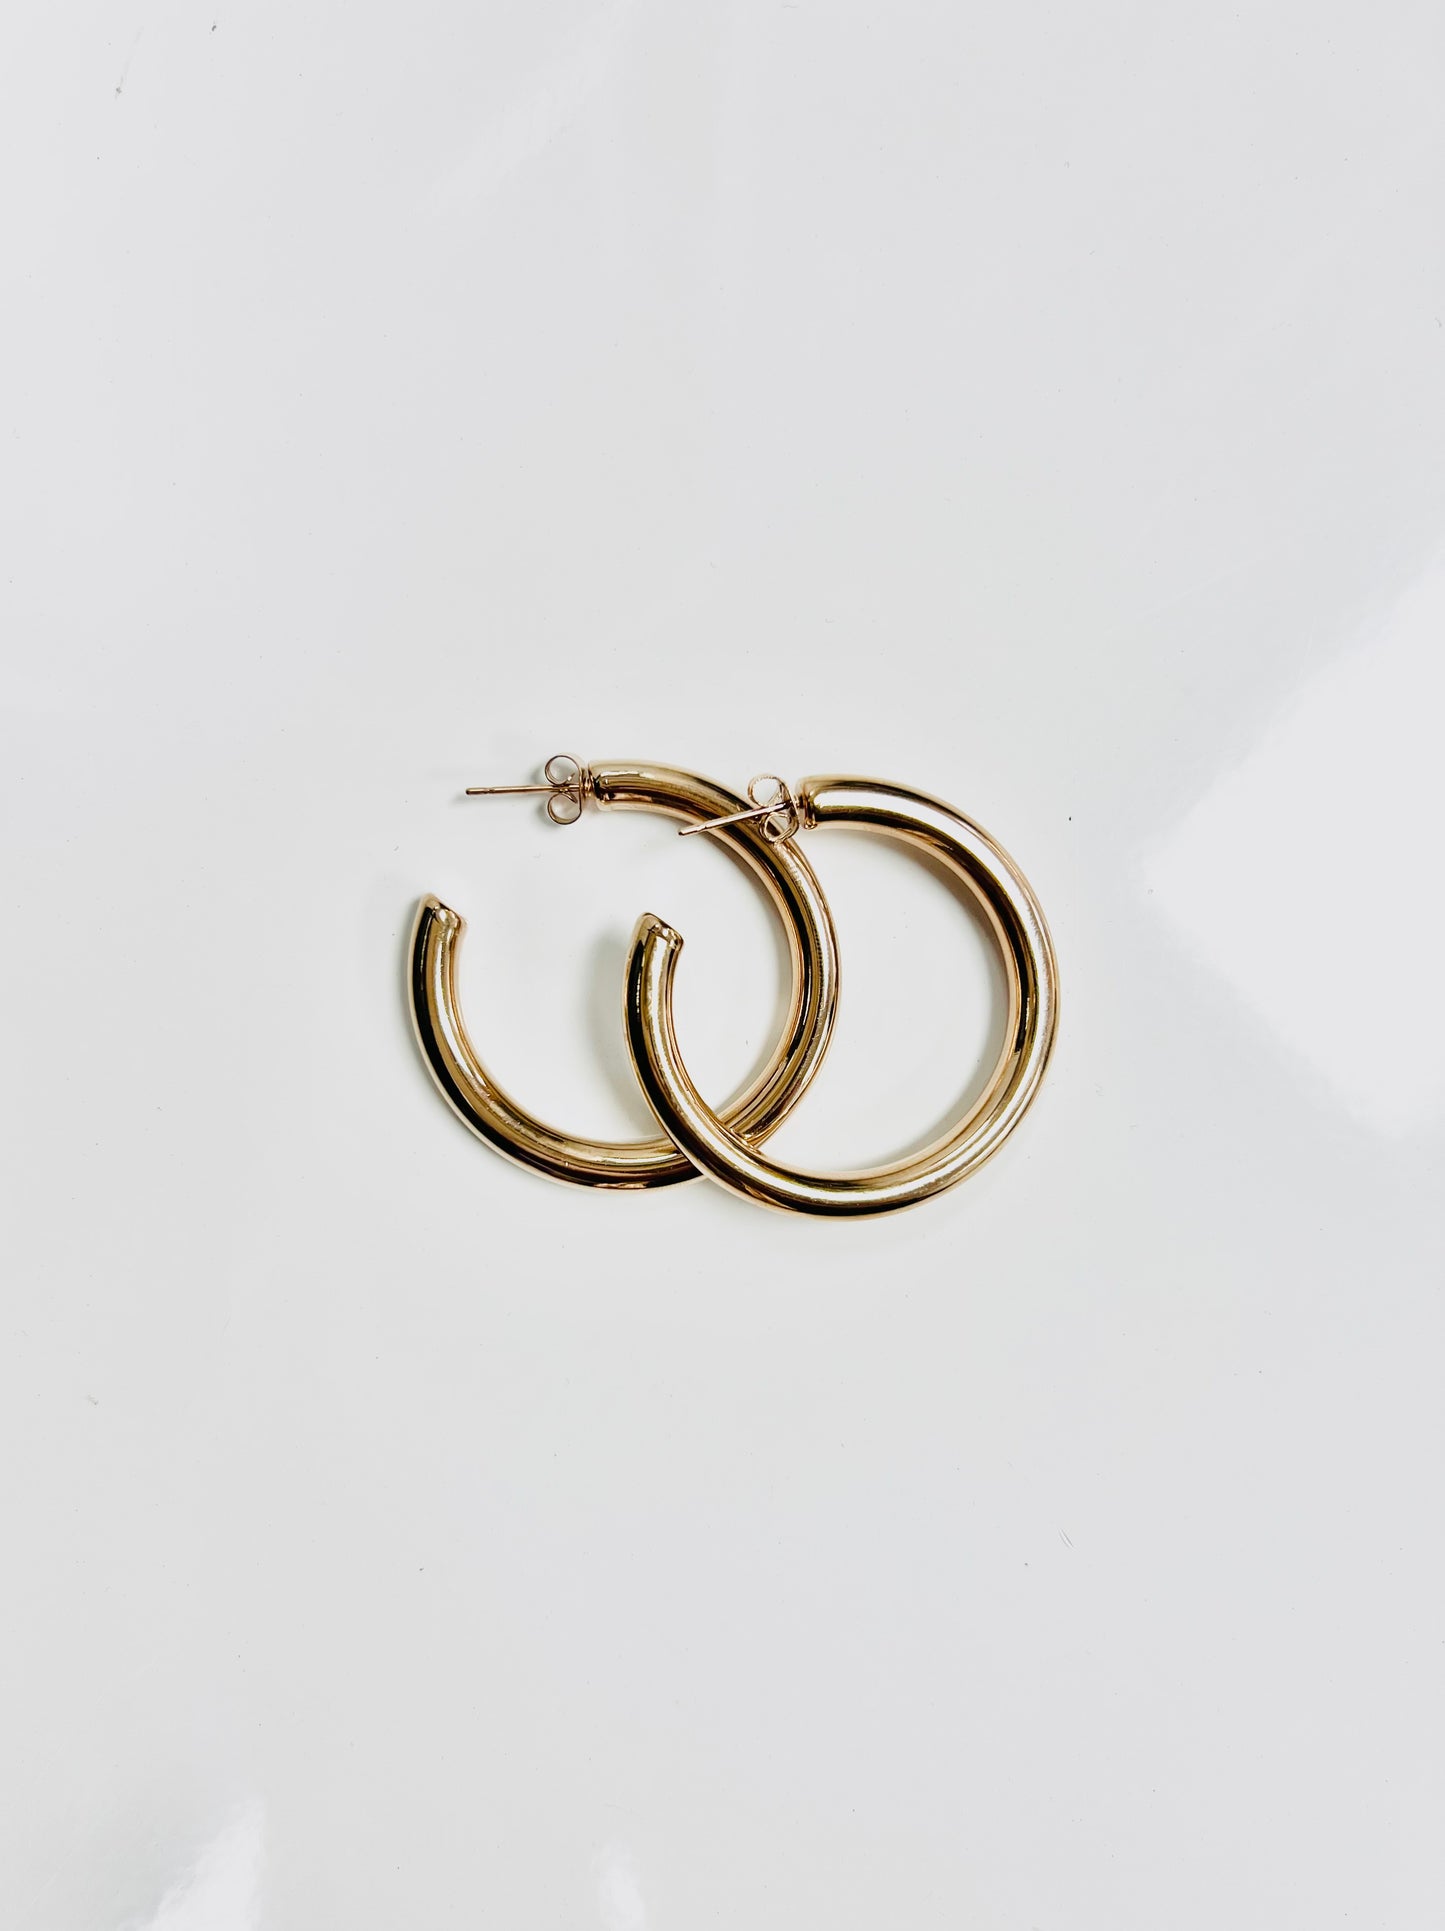 Small Hoops (Gold, Silver) by Yomi Styling